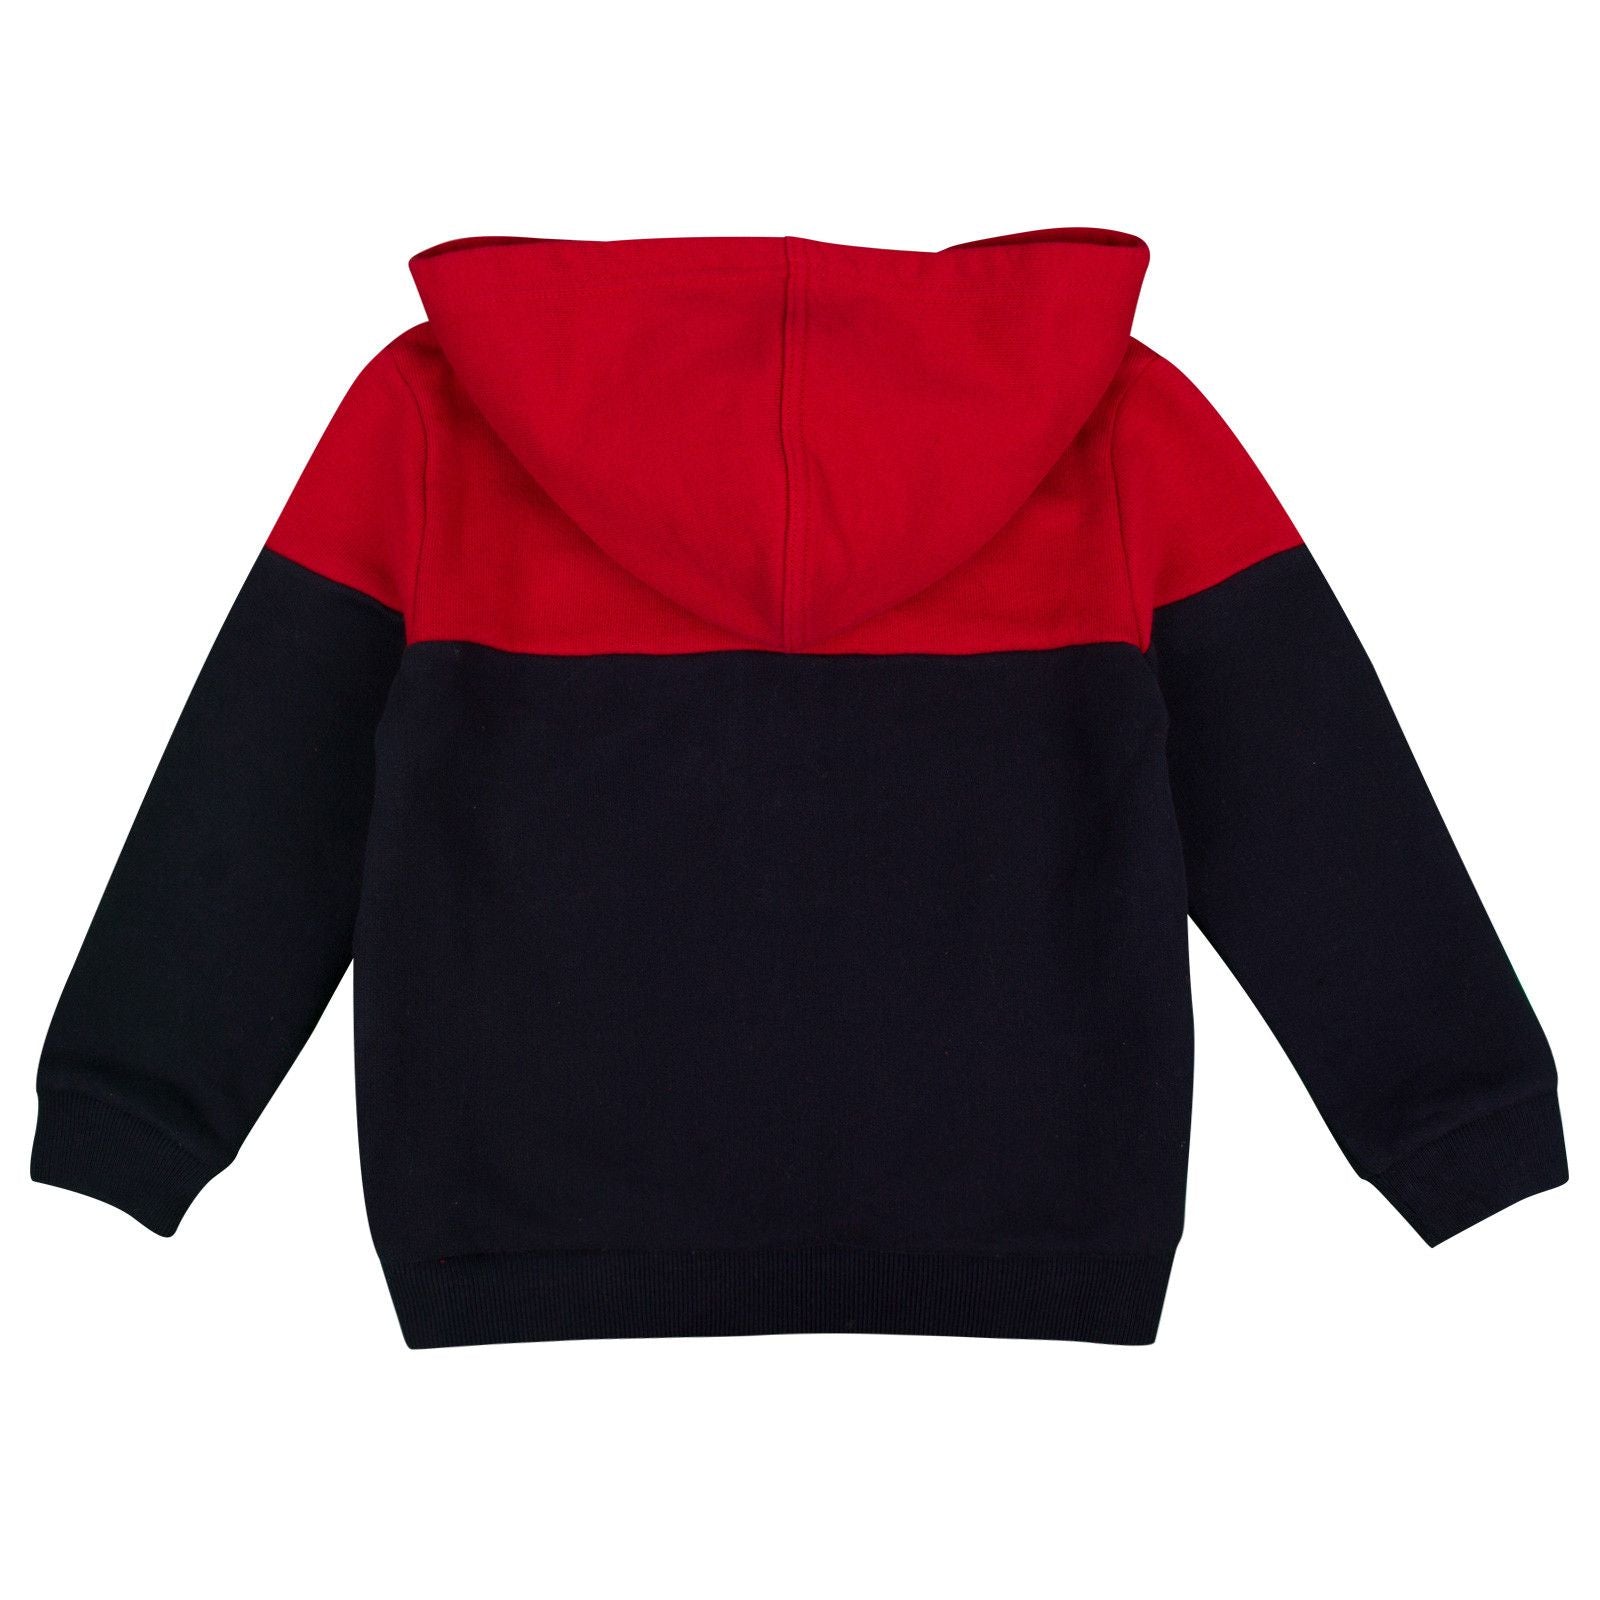 Boys Navy Blue&Red Ribbed Knited Trims Hooded Jacket - CÉMAROSE | Children's Fashion Store - 2